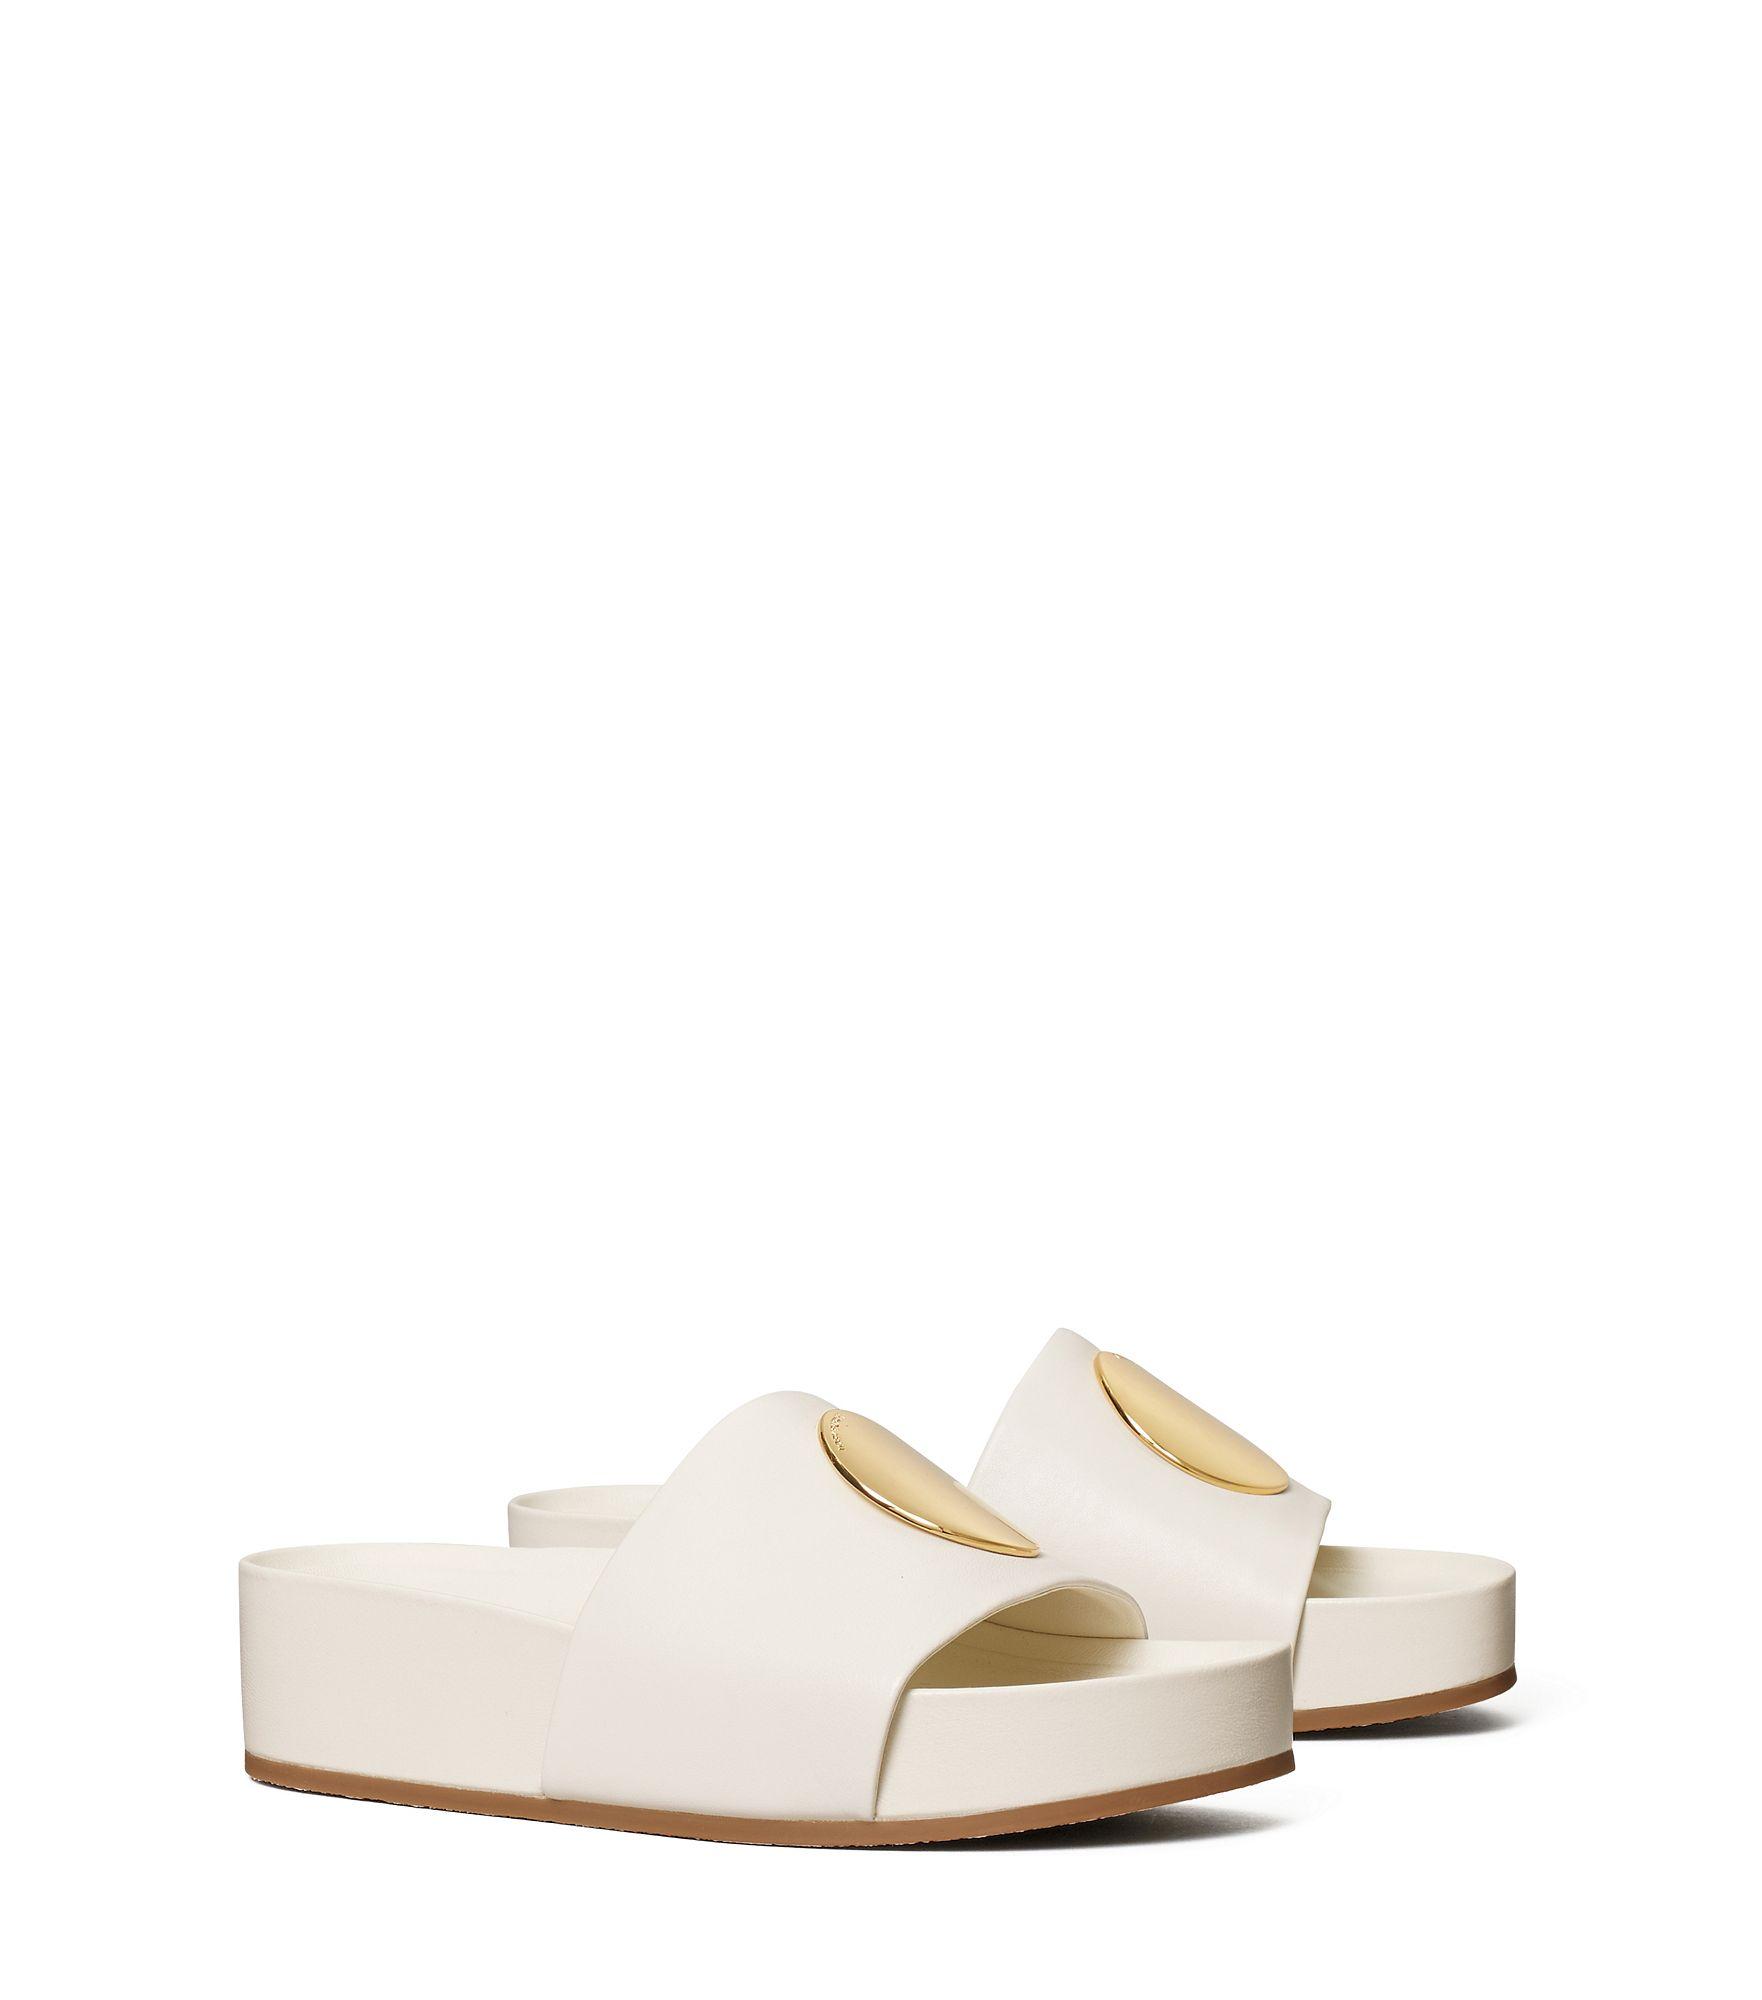 Tory Burch Leather Patos Slide in Burnt Tan (White) - Lyst